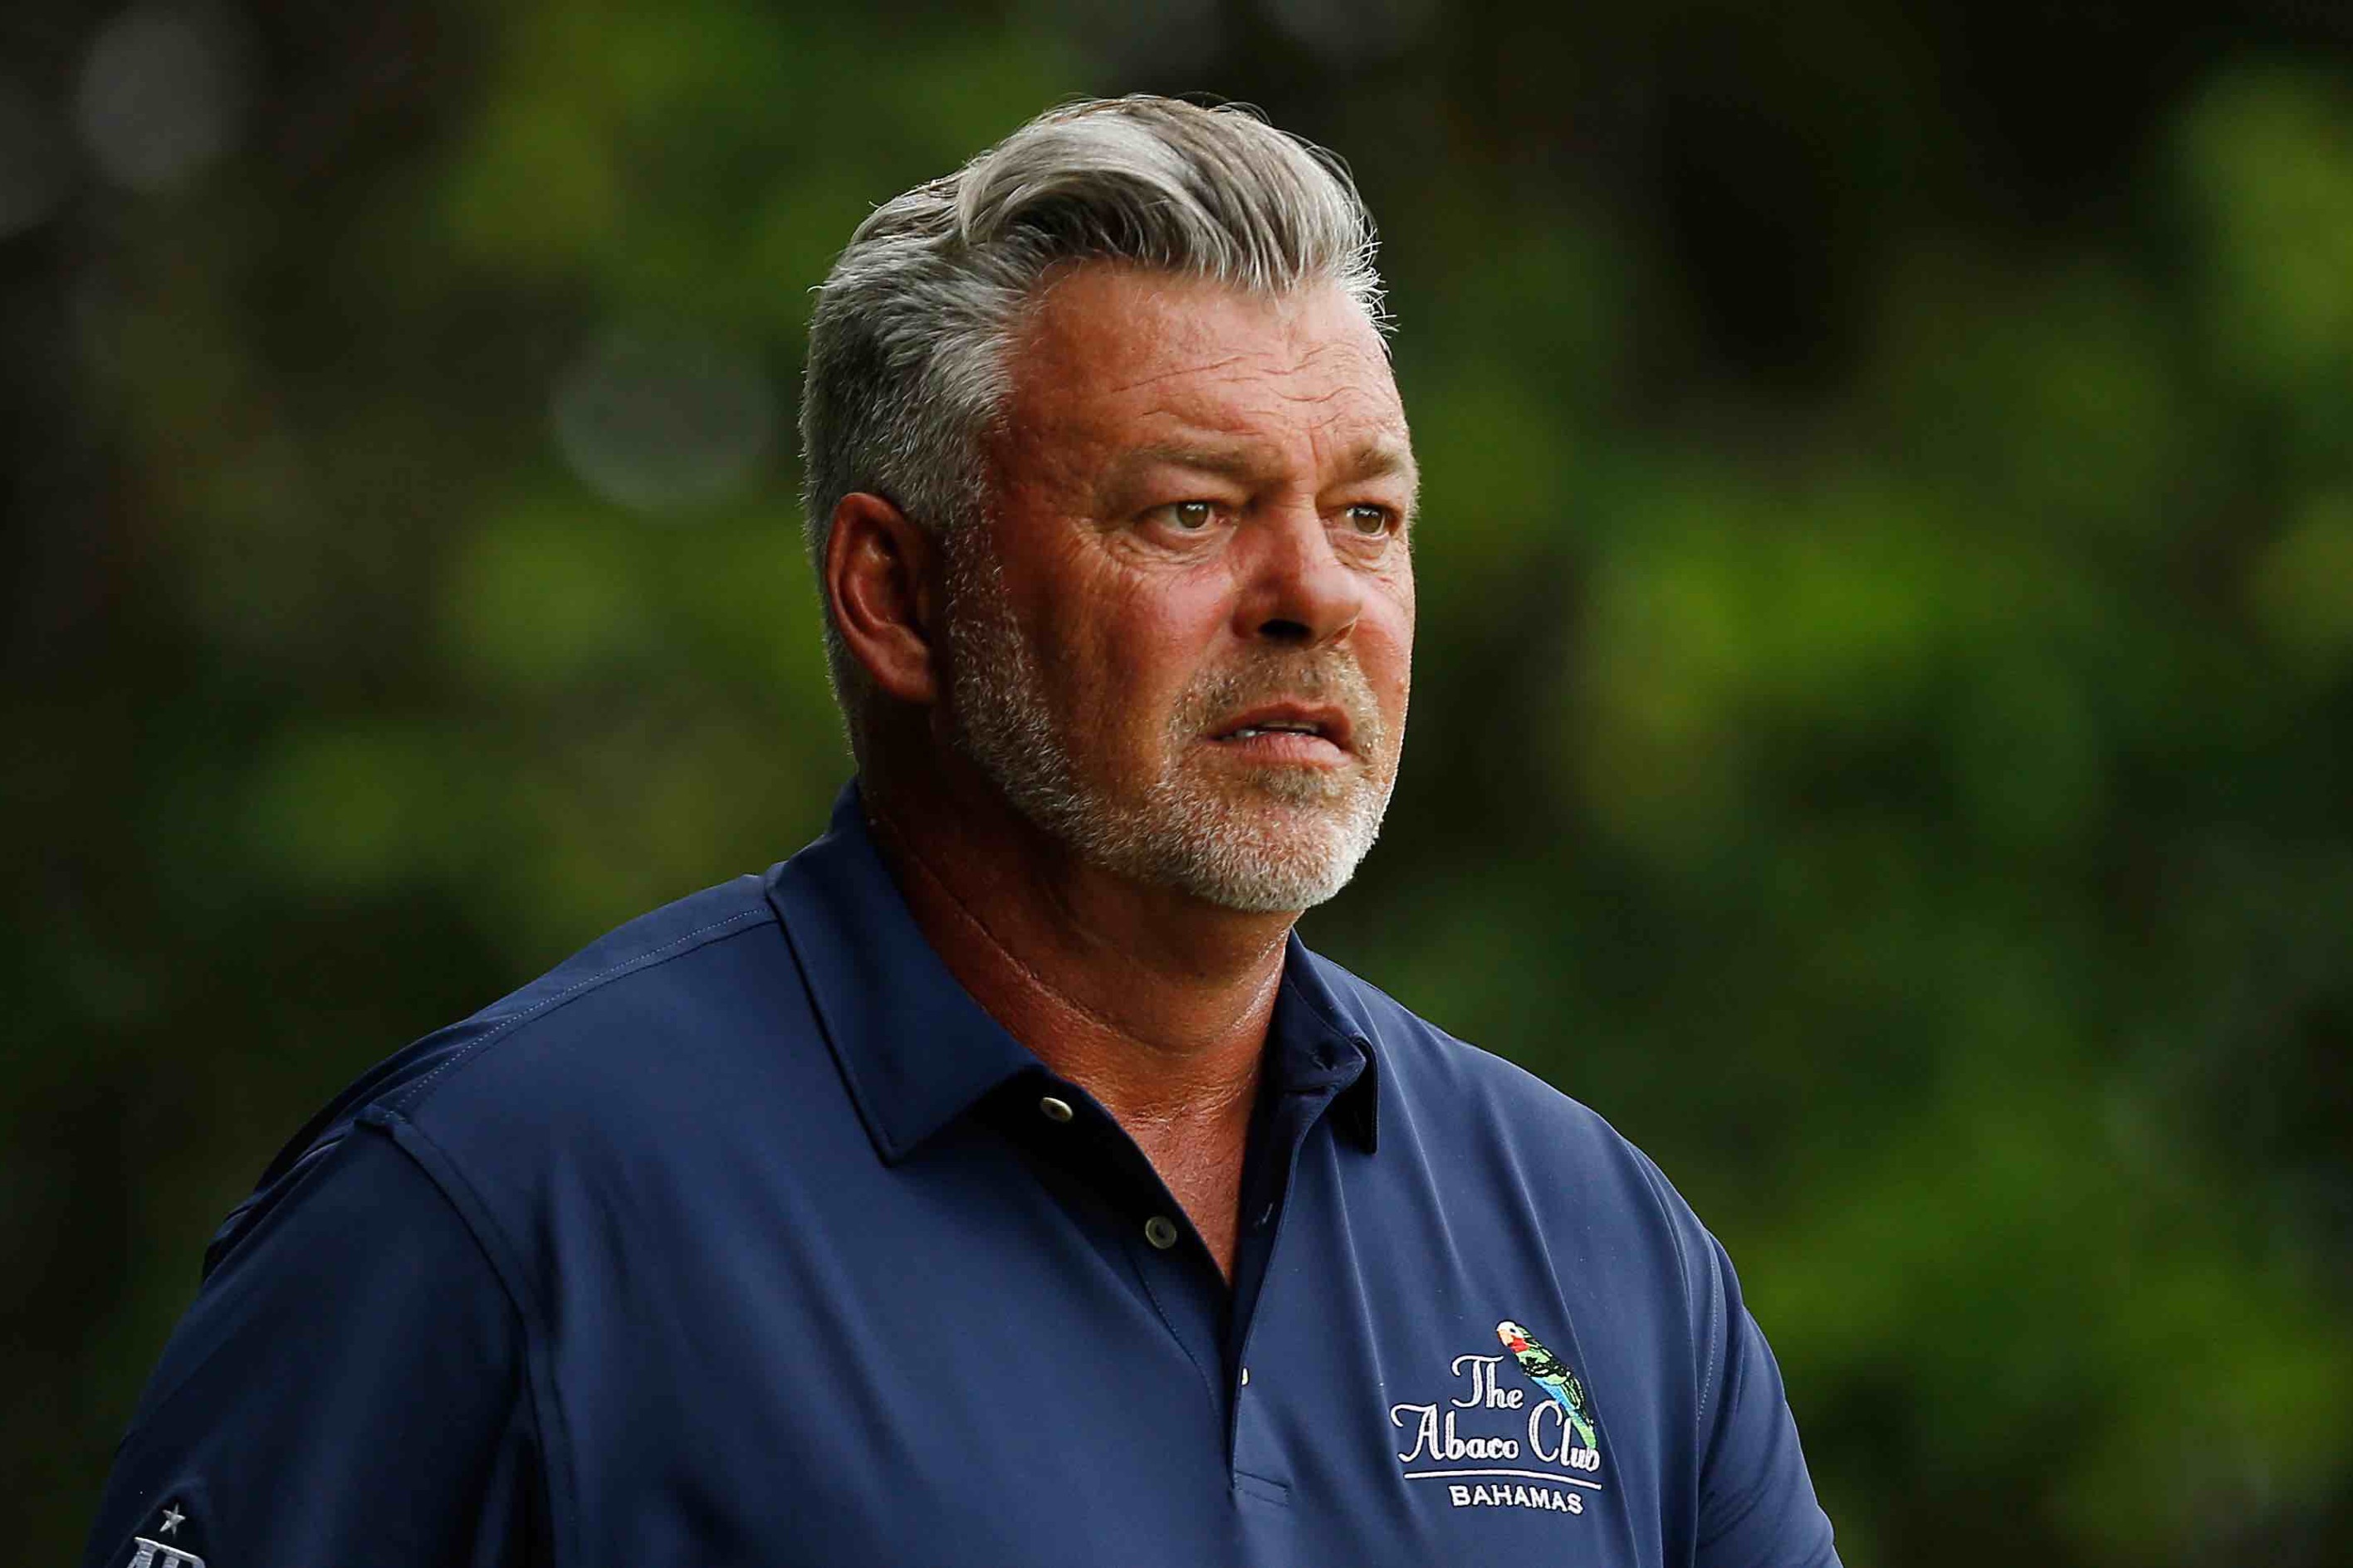 Darren Clarke has a simple solution to combat slow play